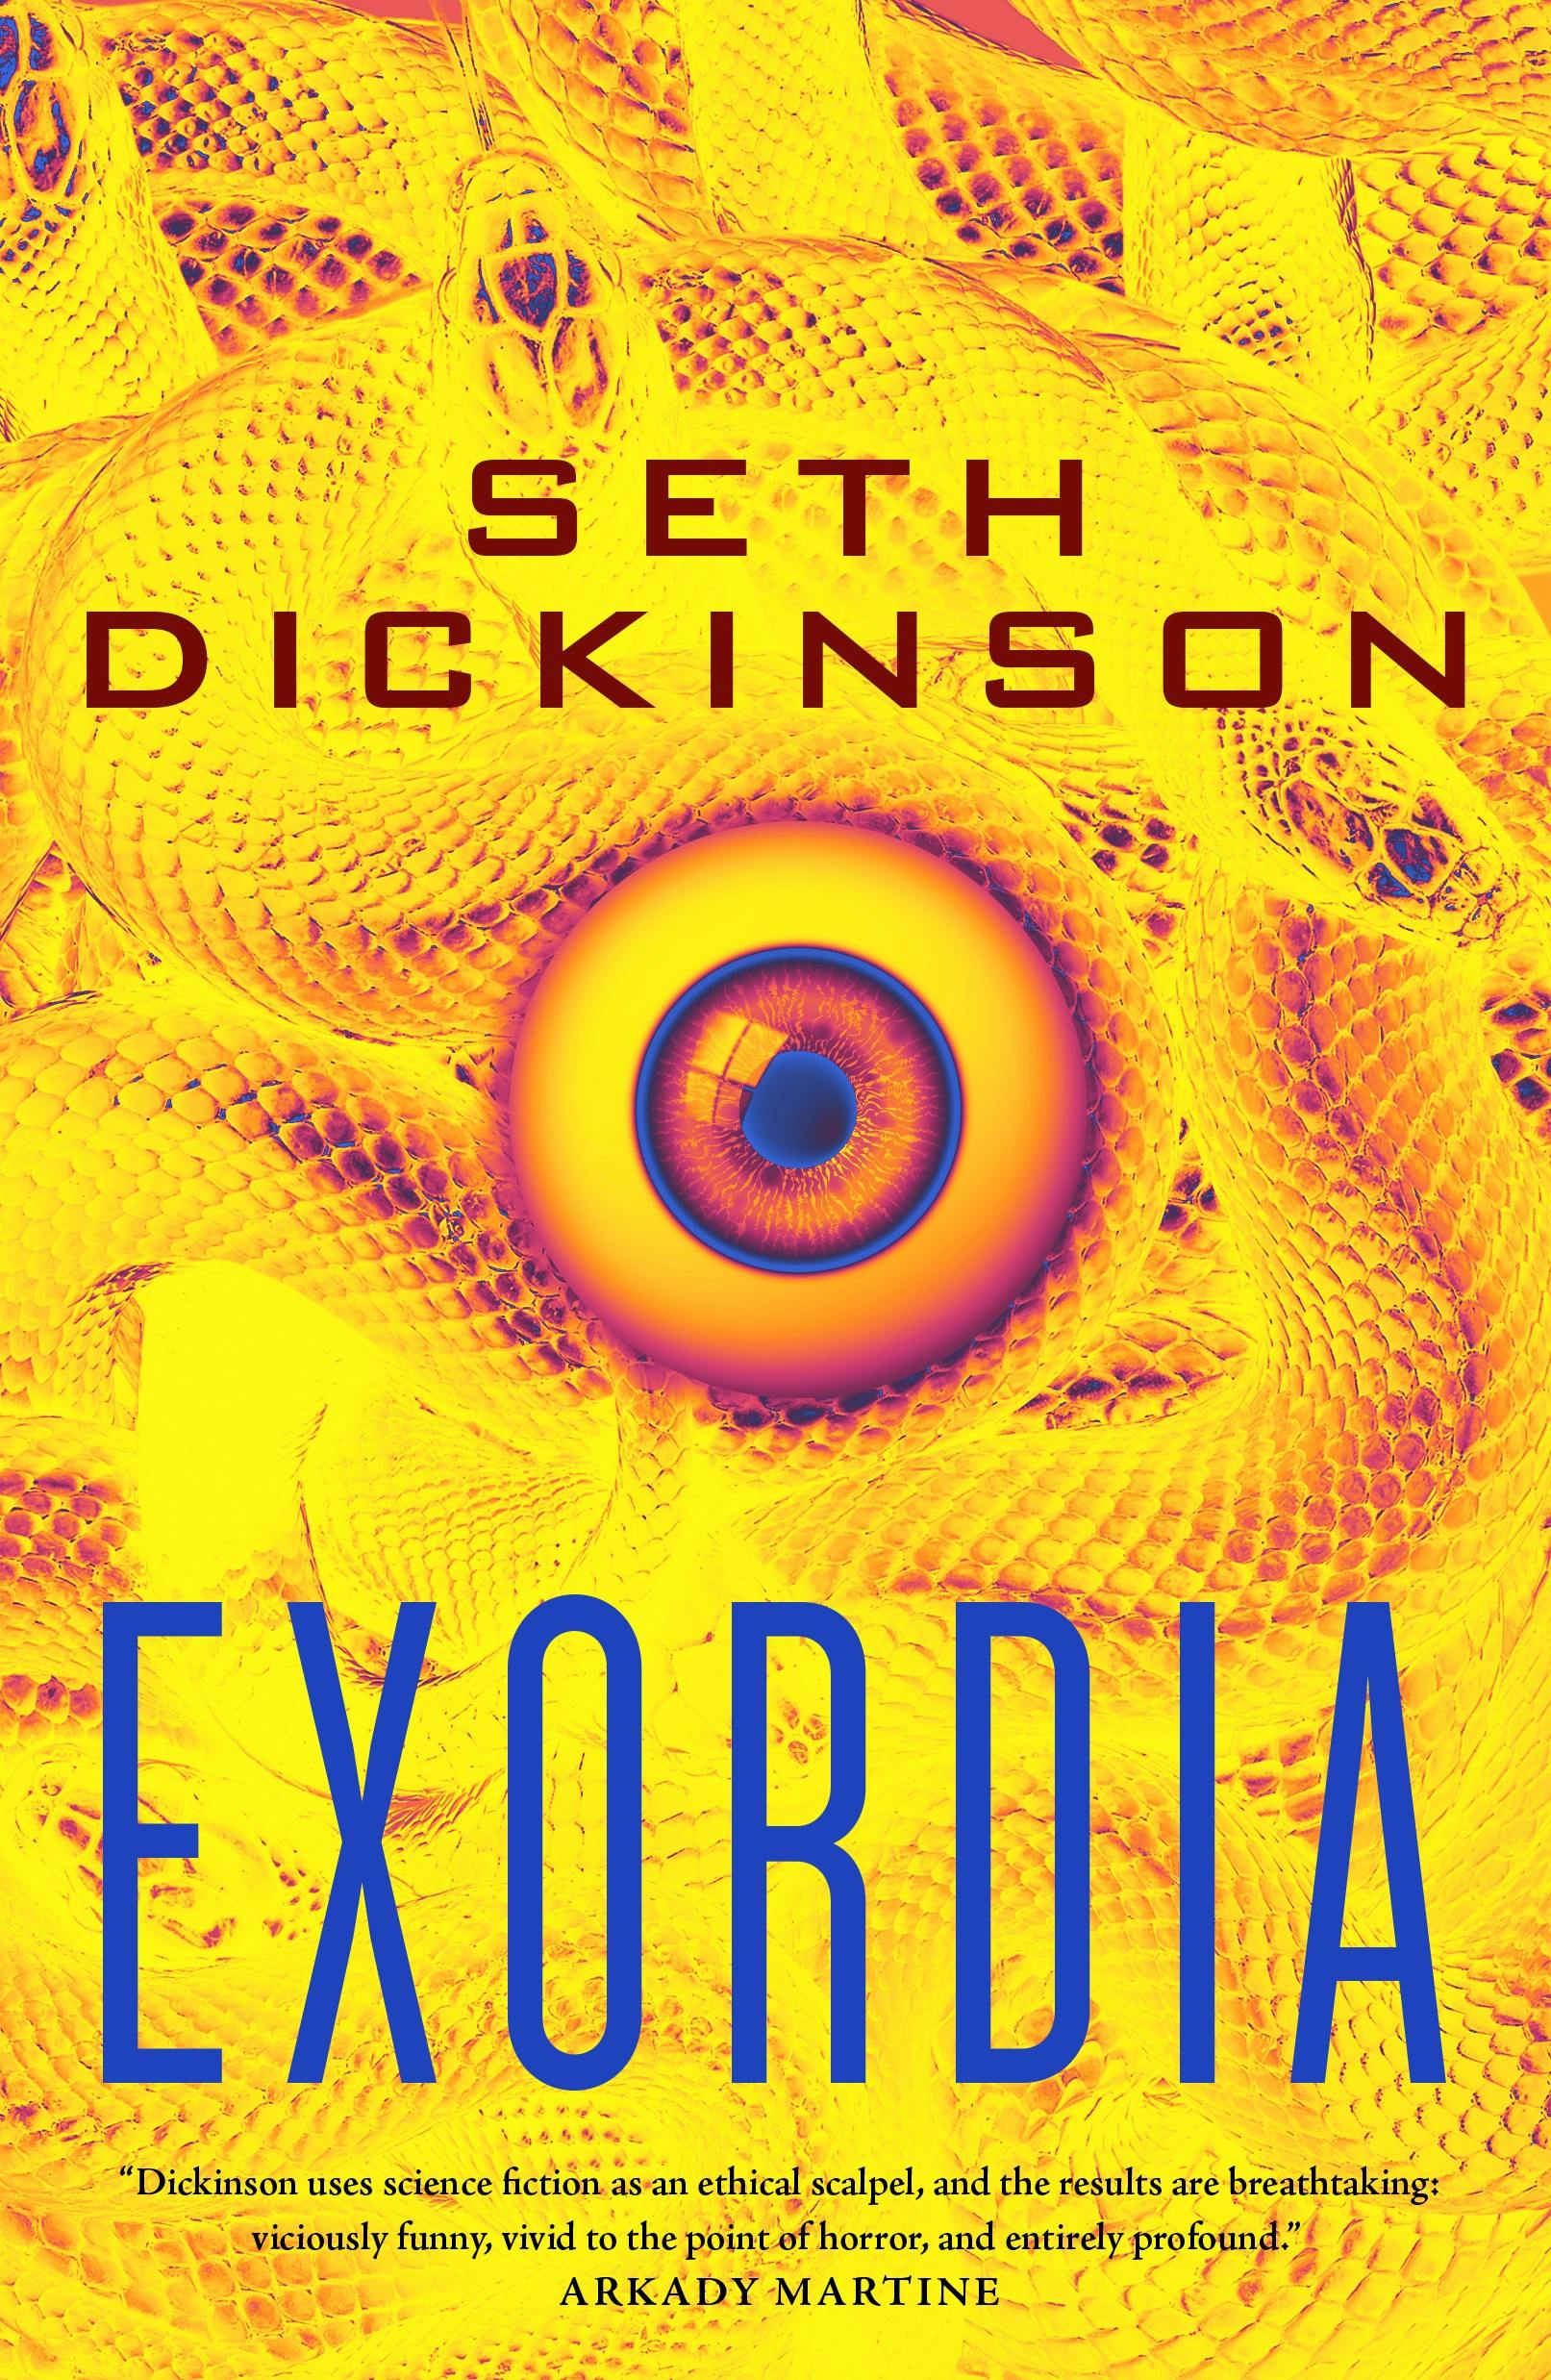 Cover for the book titled as: Exordia